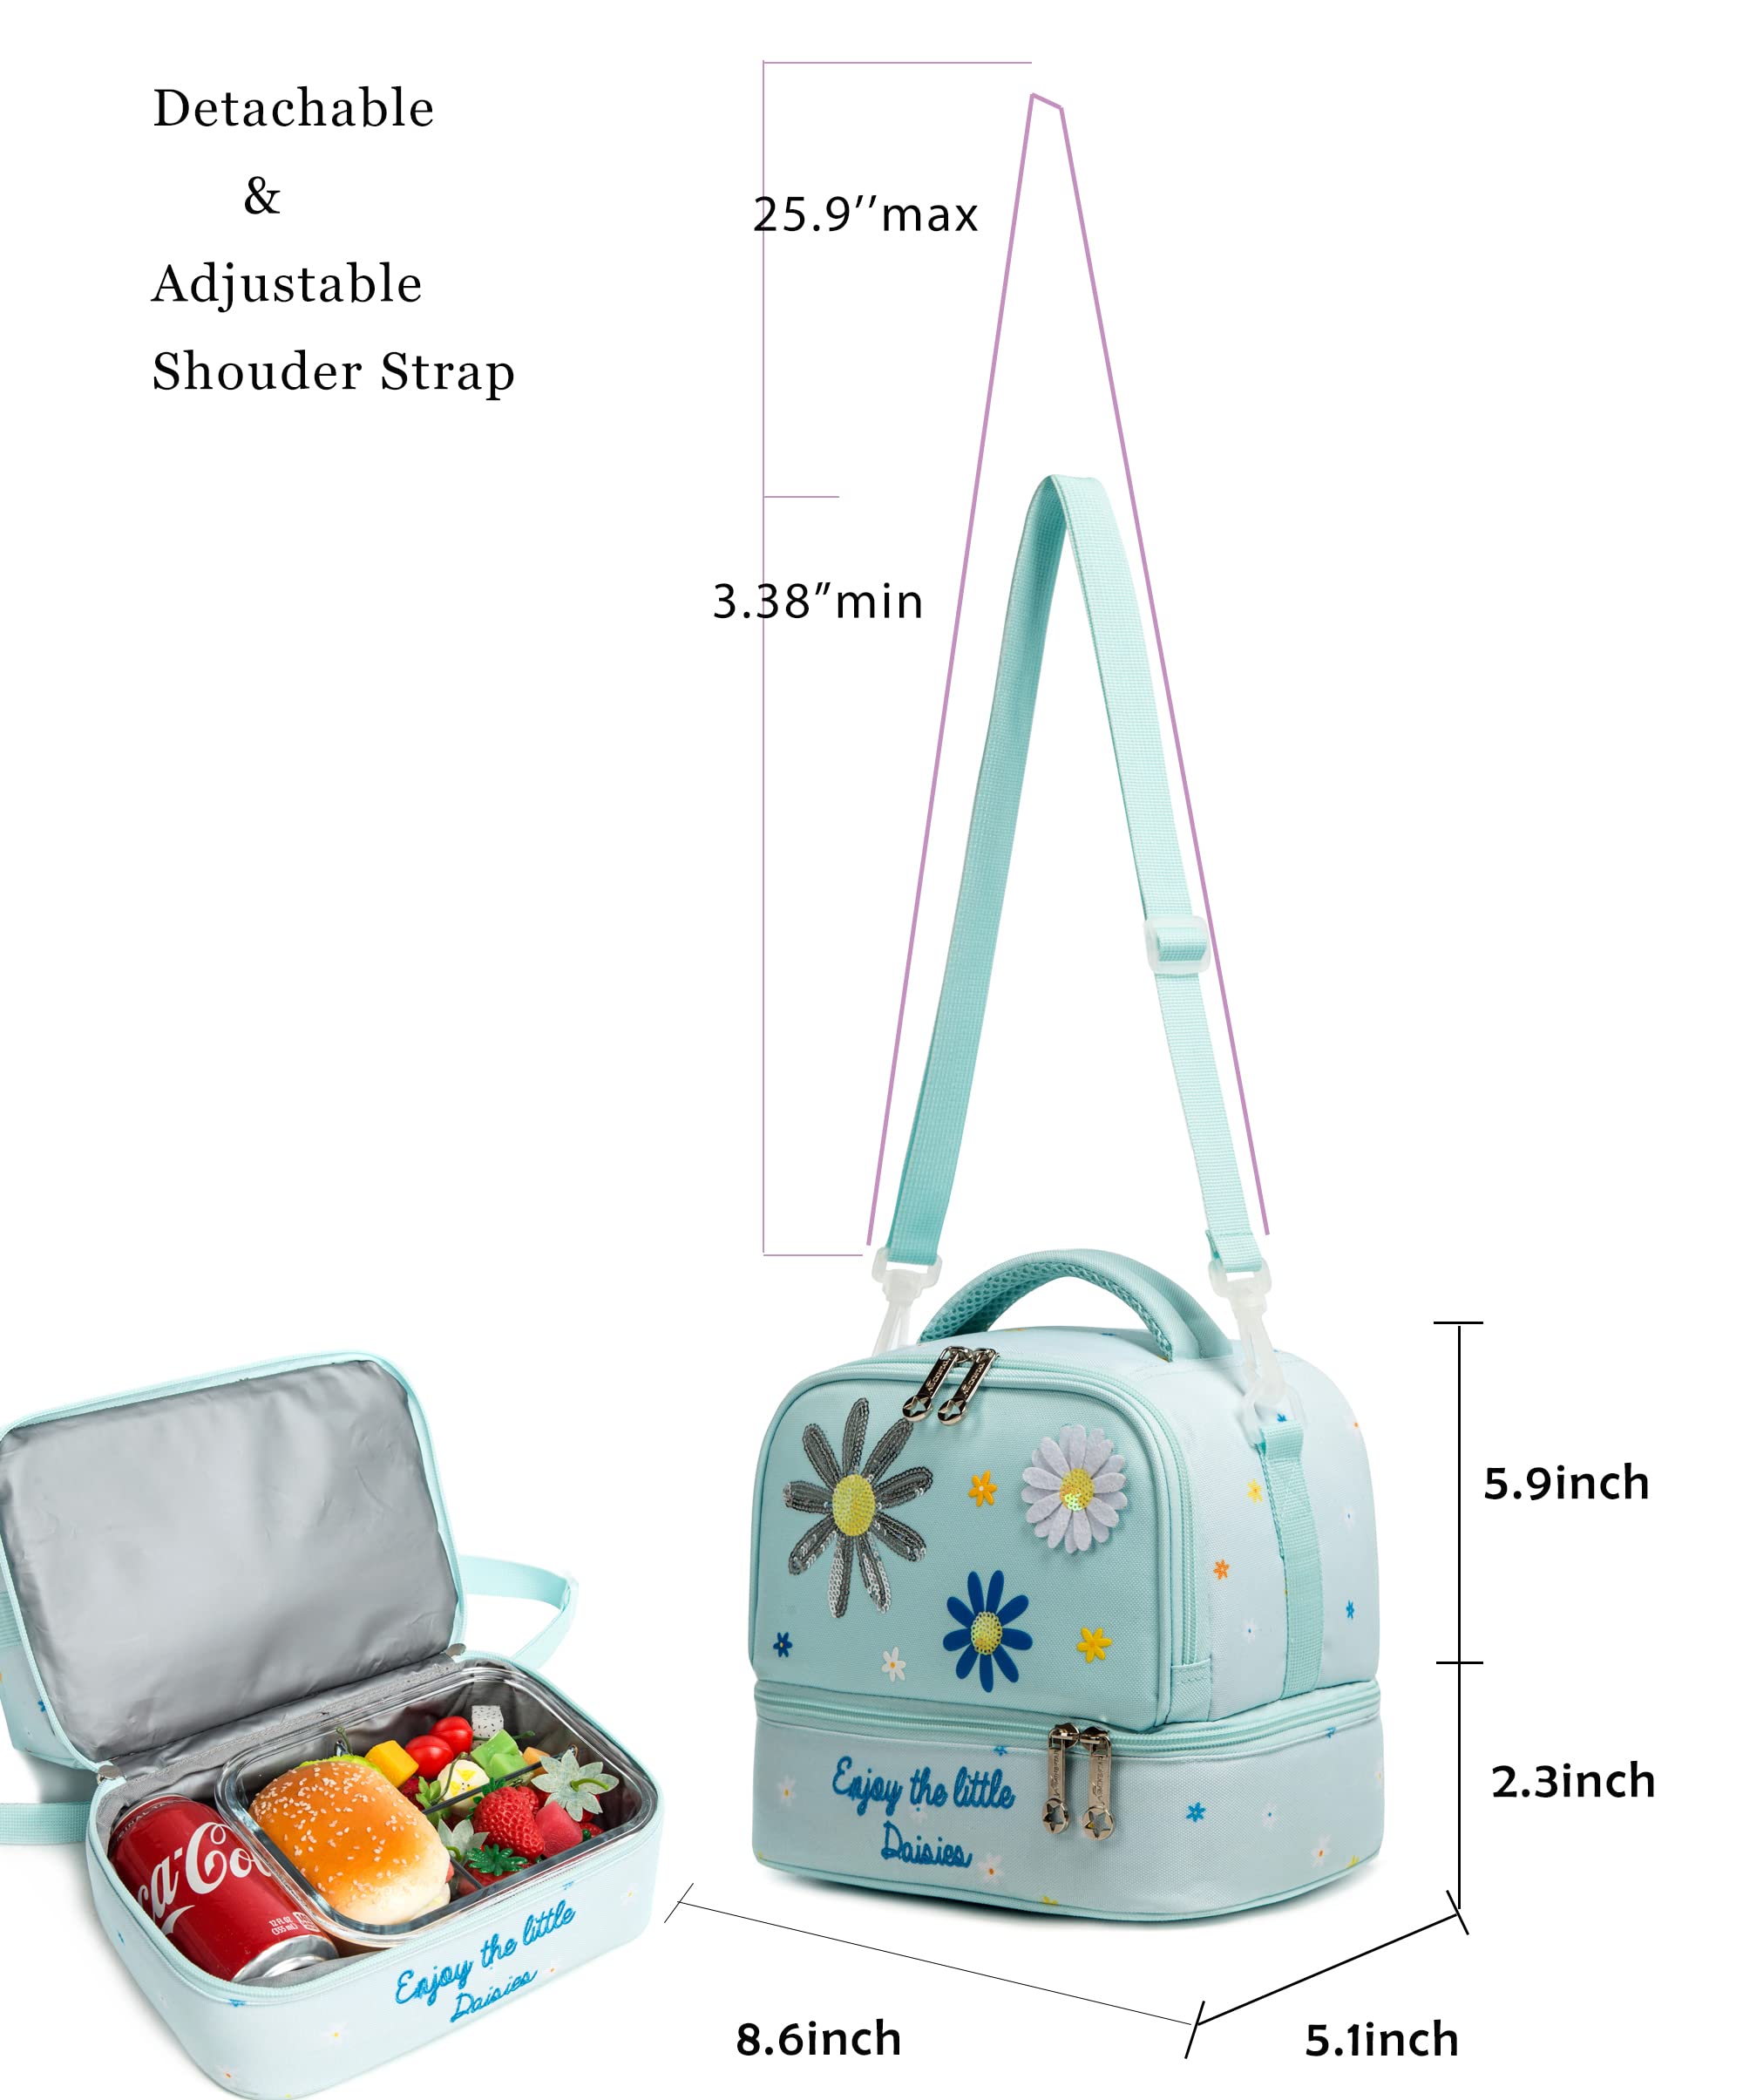 MOHCO Kids Lunch Bag Insulated Bento Cooler Bag Two compartments Cooler for Boys and Girls with Adjustable Strap Travel Lunch Tote